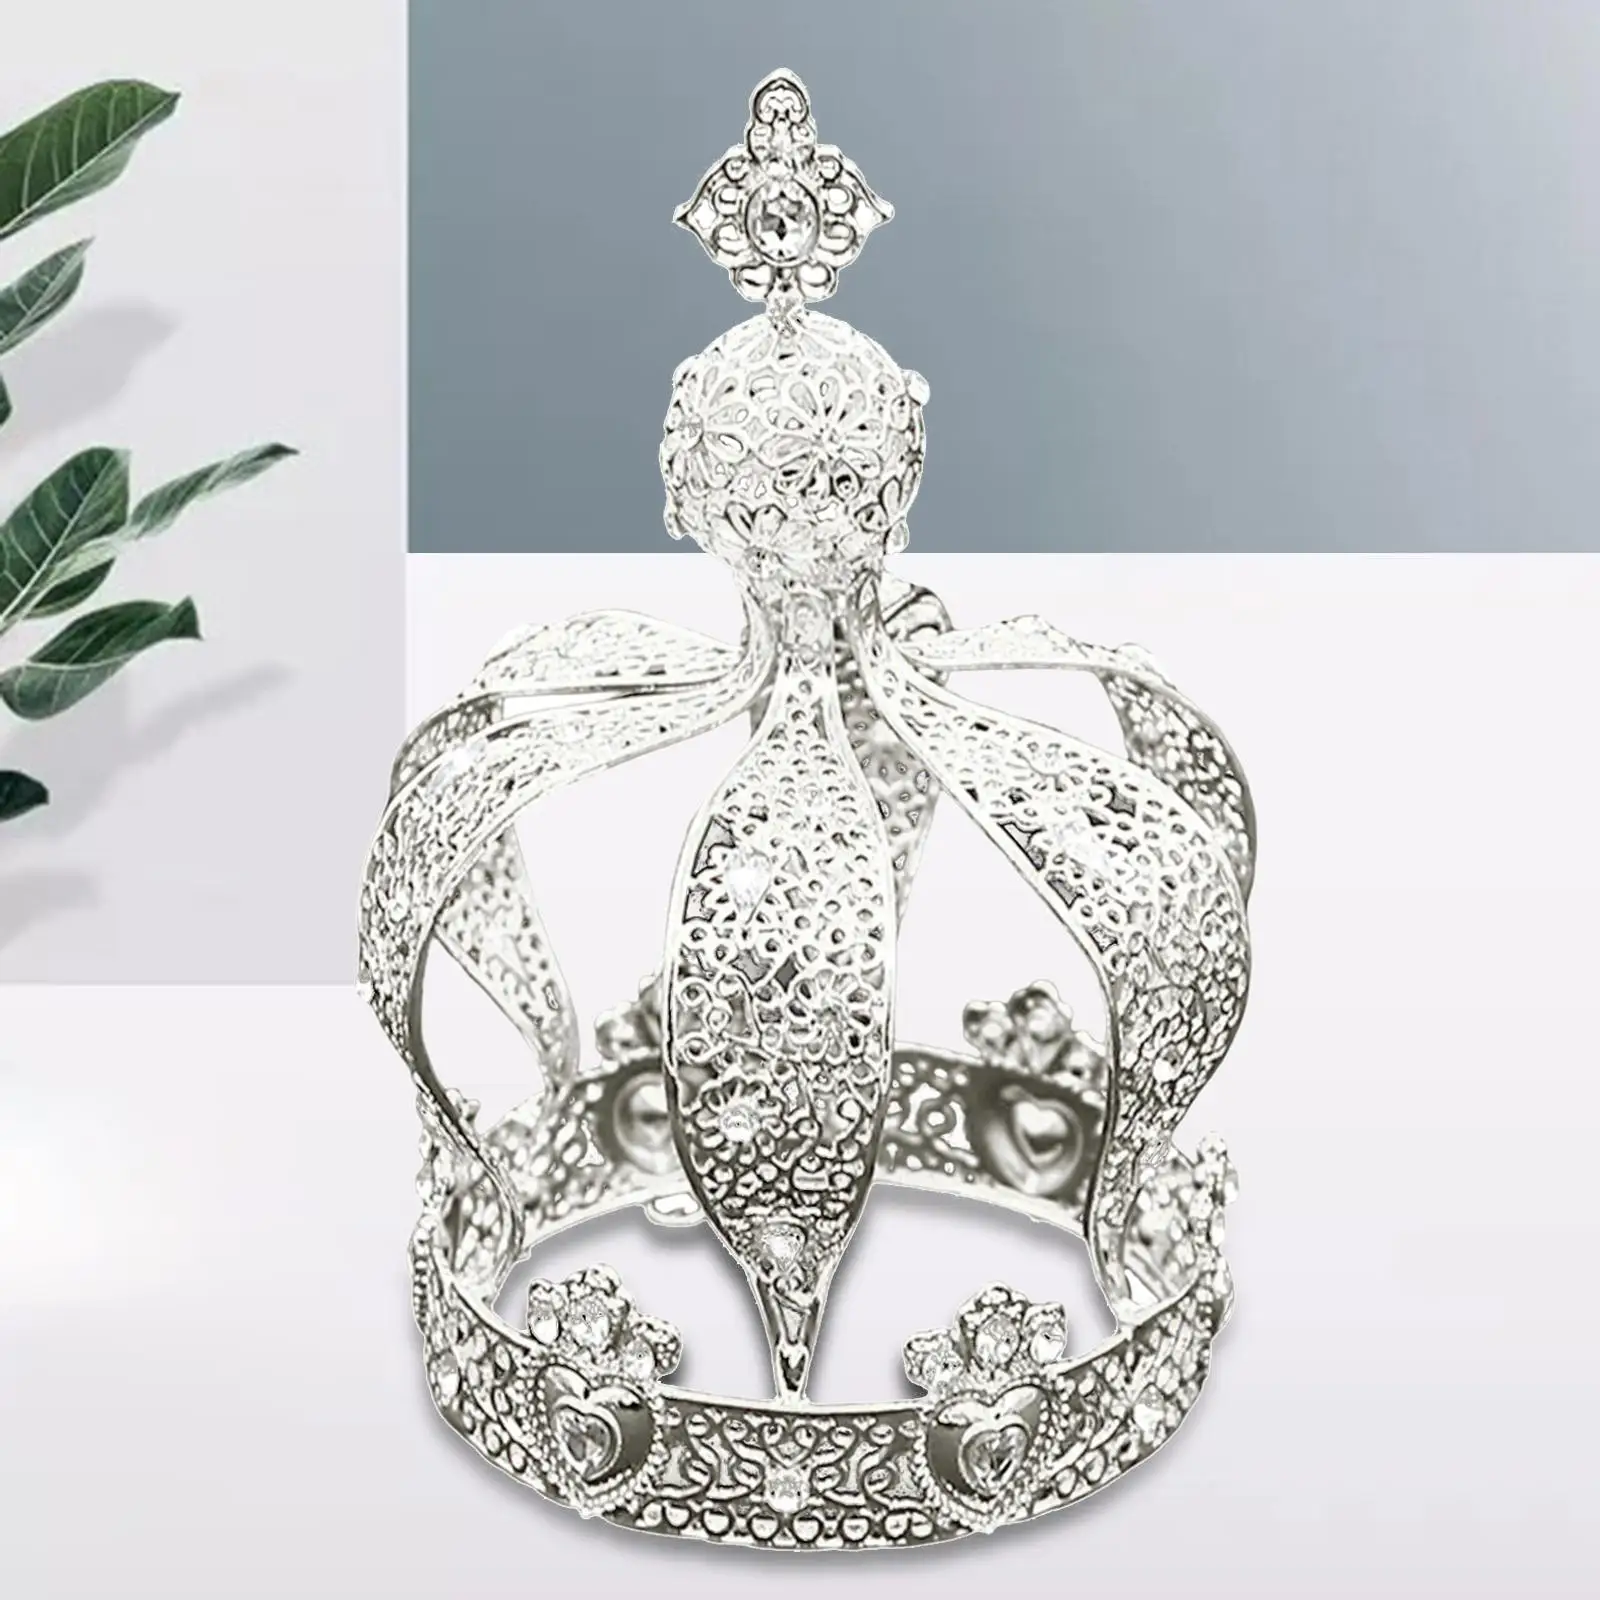 Crown Cake Topper Cupcake Decoration Alloy Cake Ornament Headpieces for Birthday Party Themed Parties Anniversaries Wedding Prom